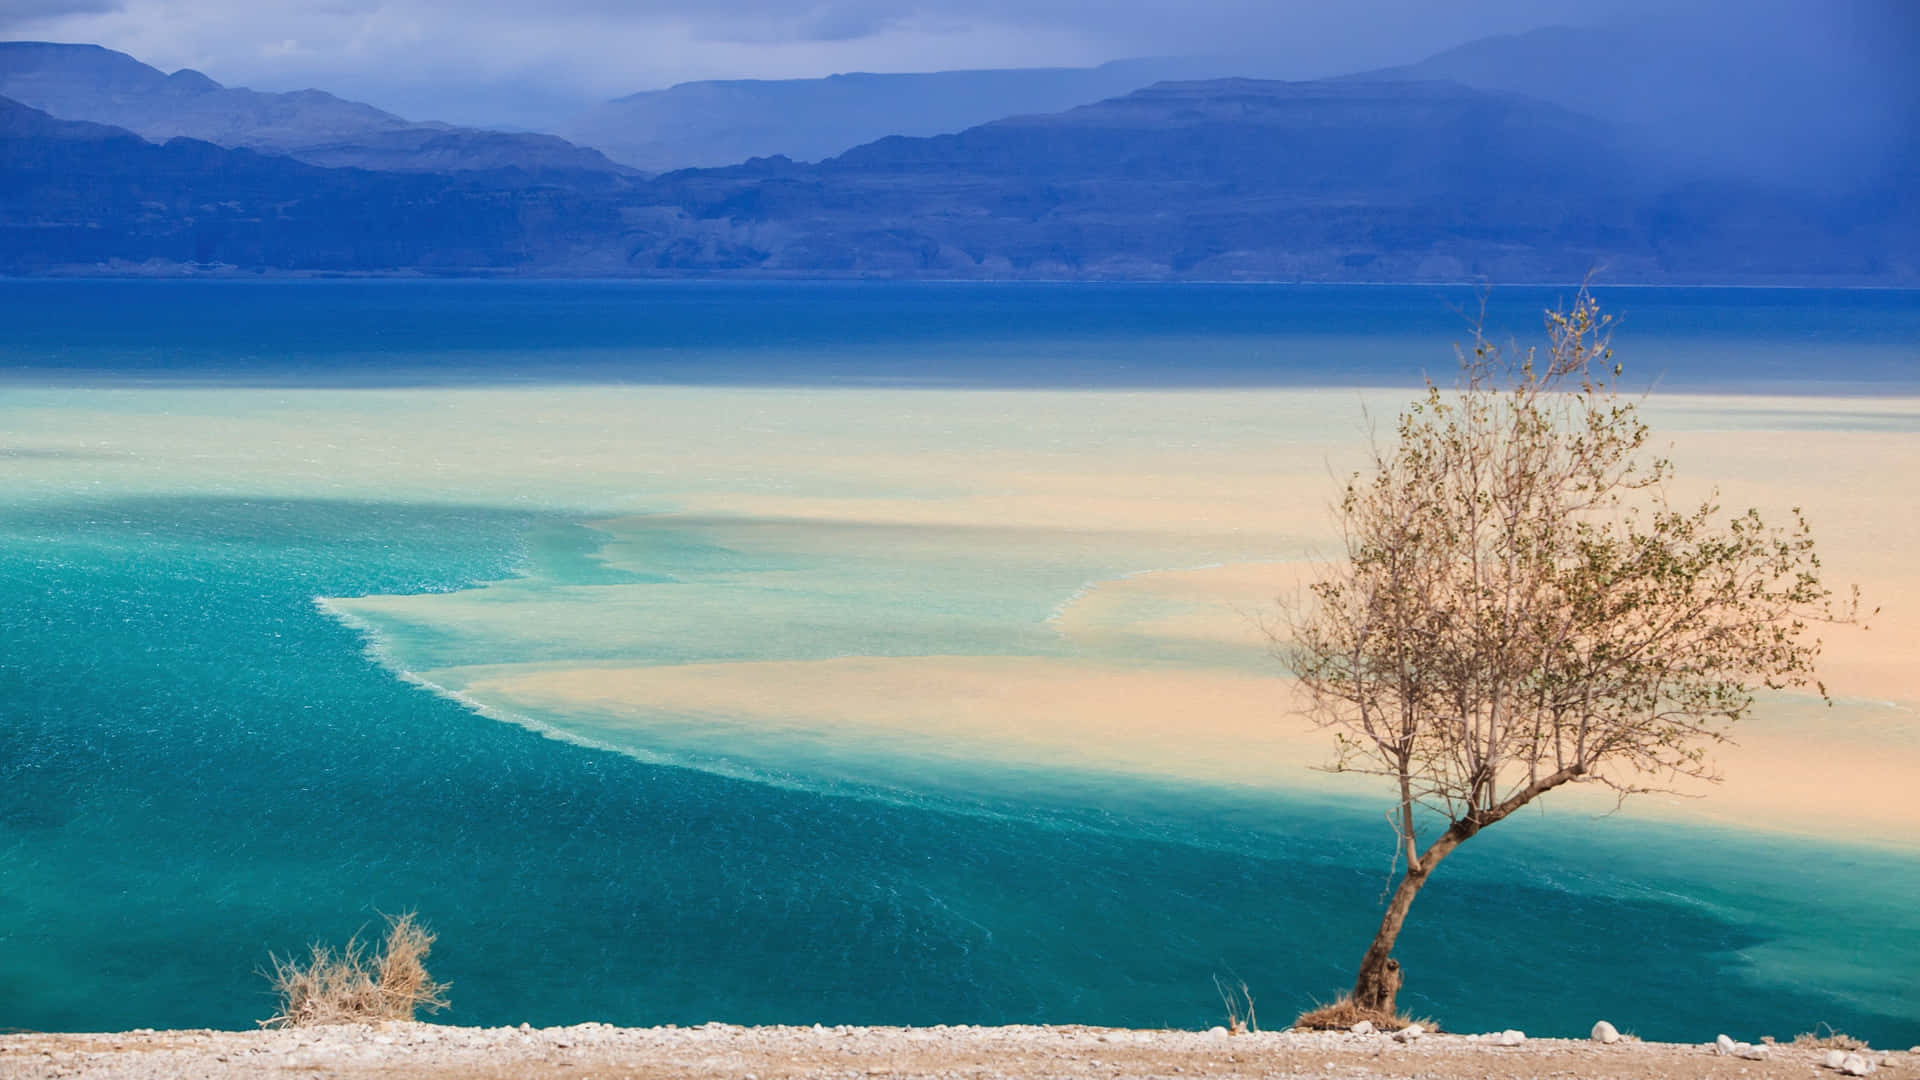 Caption: Mysteries of the Dead Sea Unveiled. Wallpaper